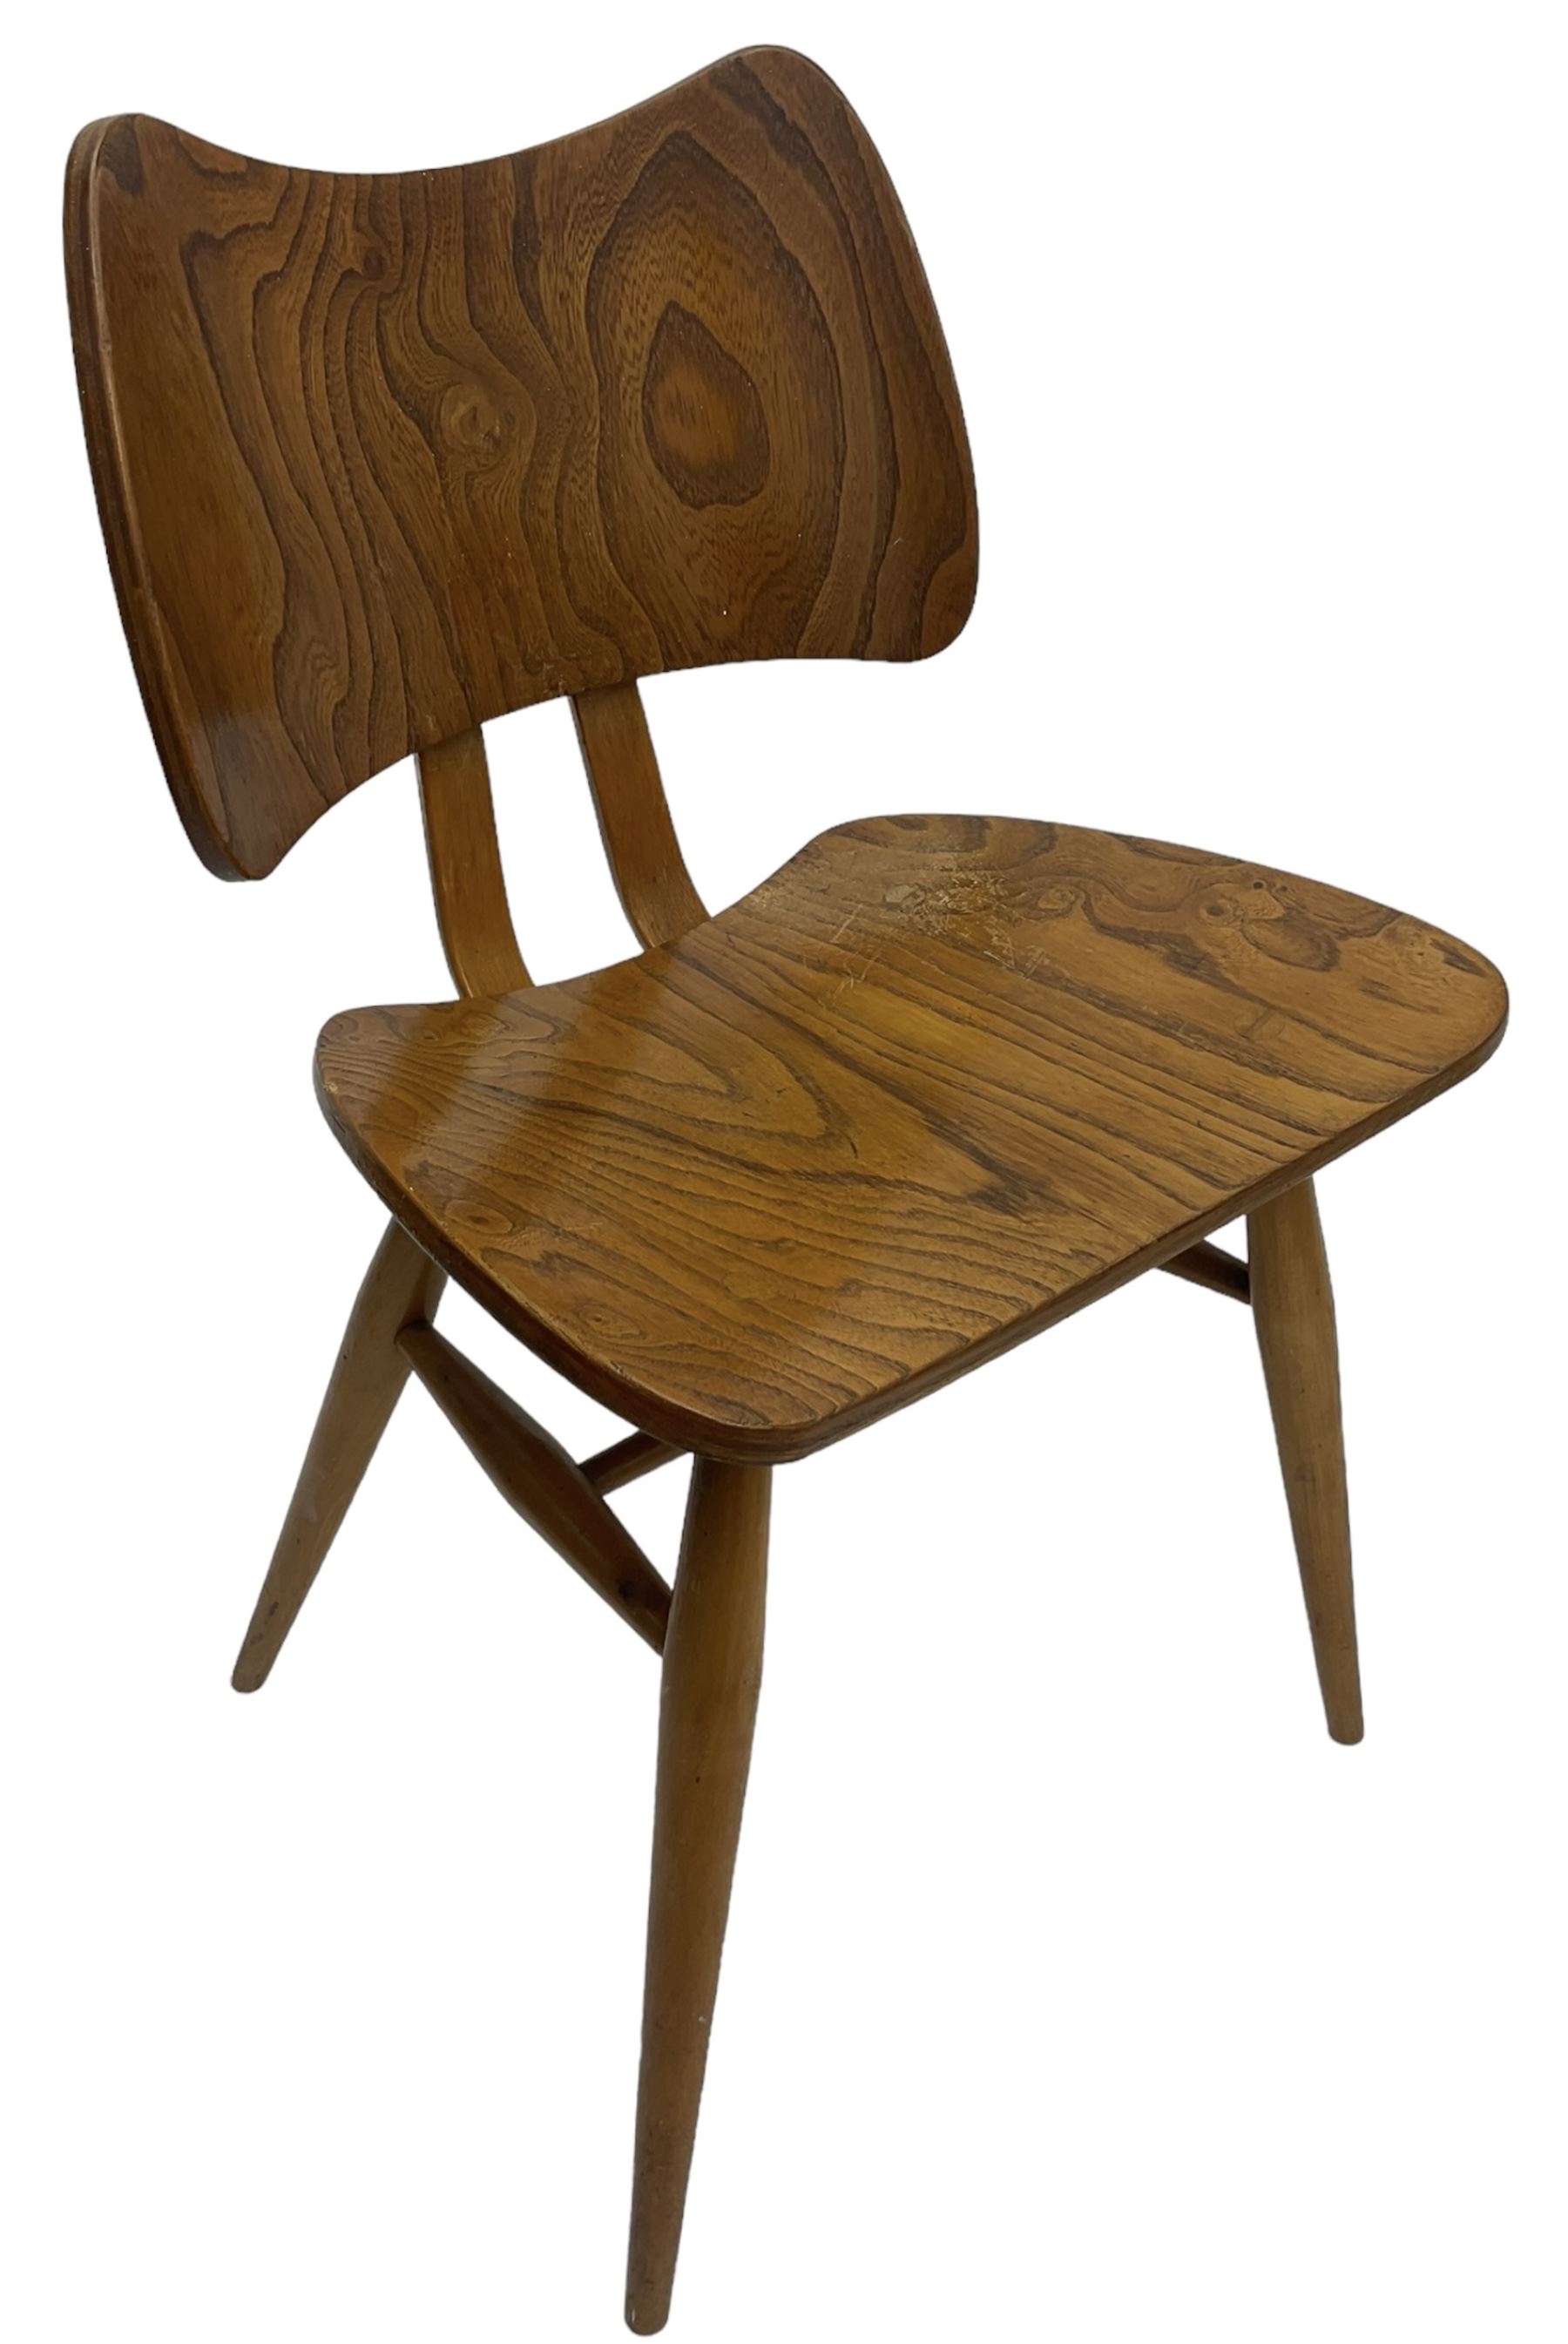 Lucian Ercolani - set of four ercol elm and beech model '401' dining chairs - Image 37 of 42